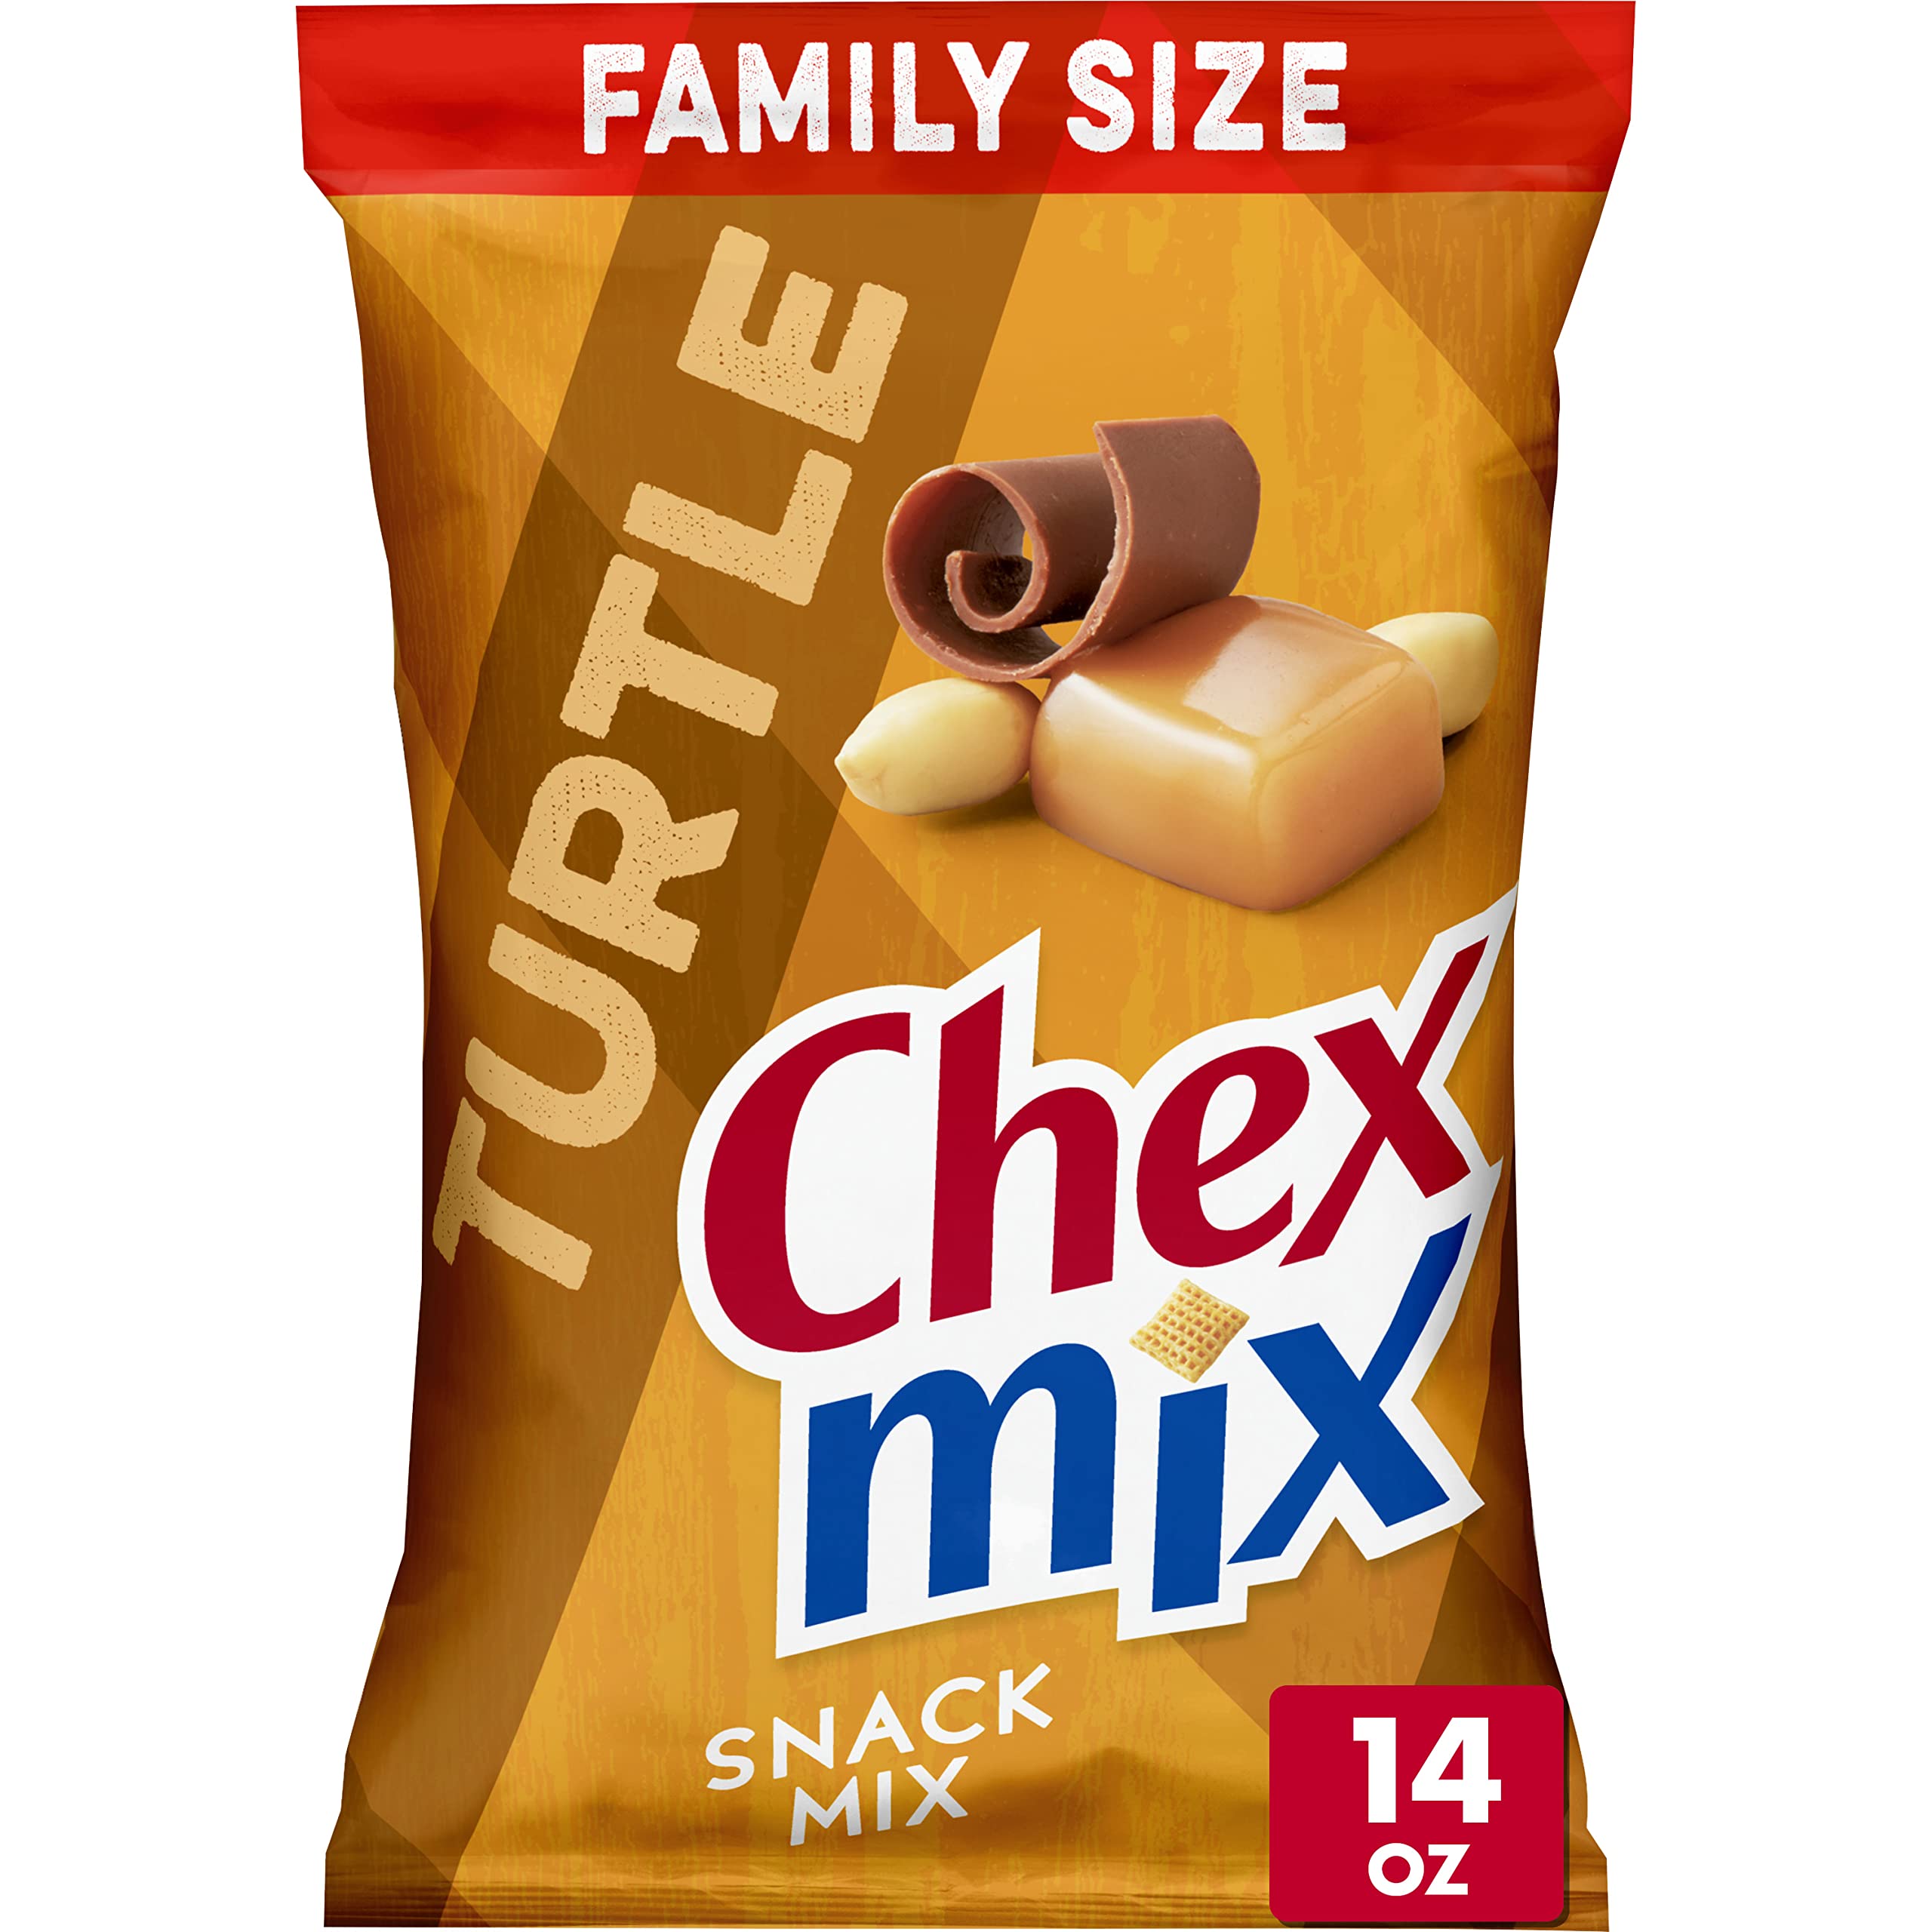 Prime Members: 14-Oz Family Size Chex Mix Snack Mix (Turtle) $3.17 + Free Shipping